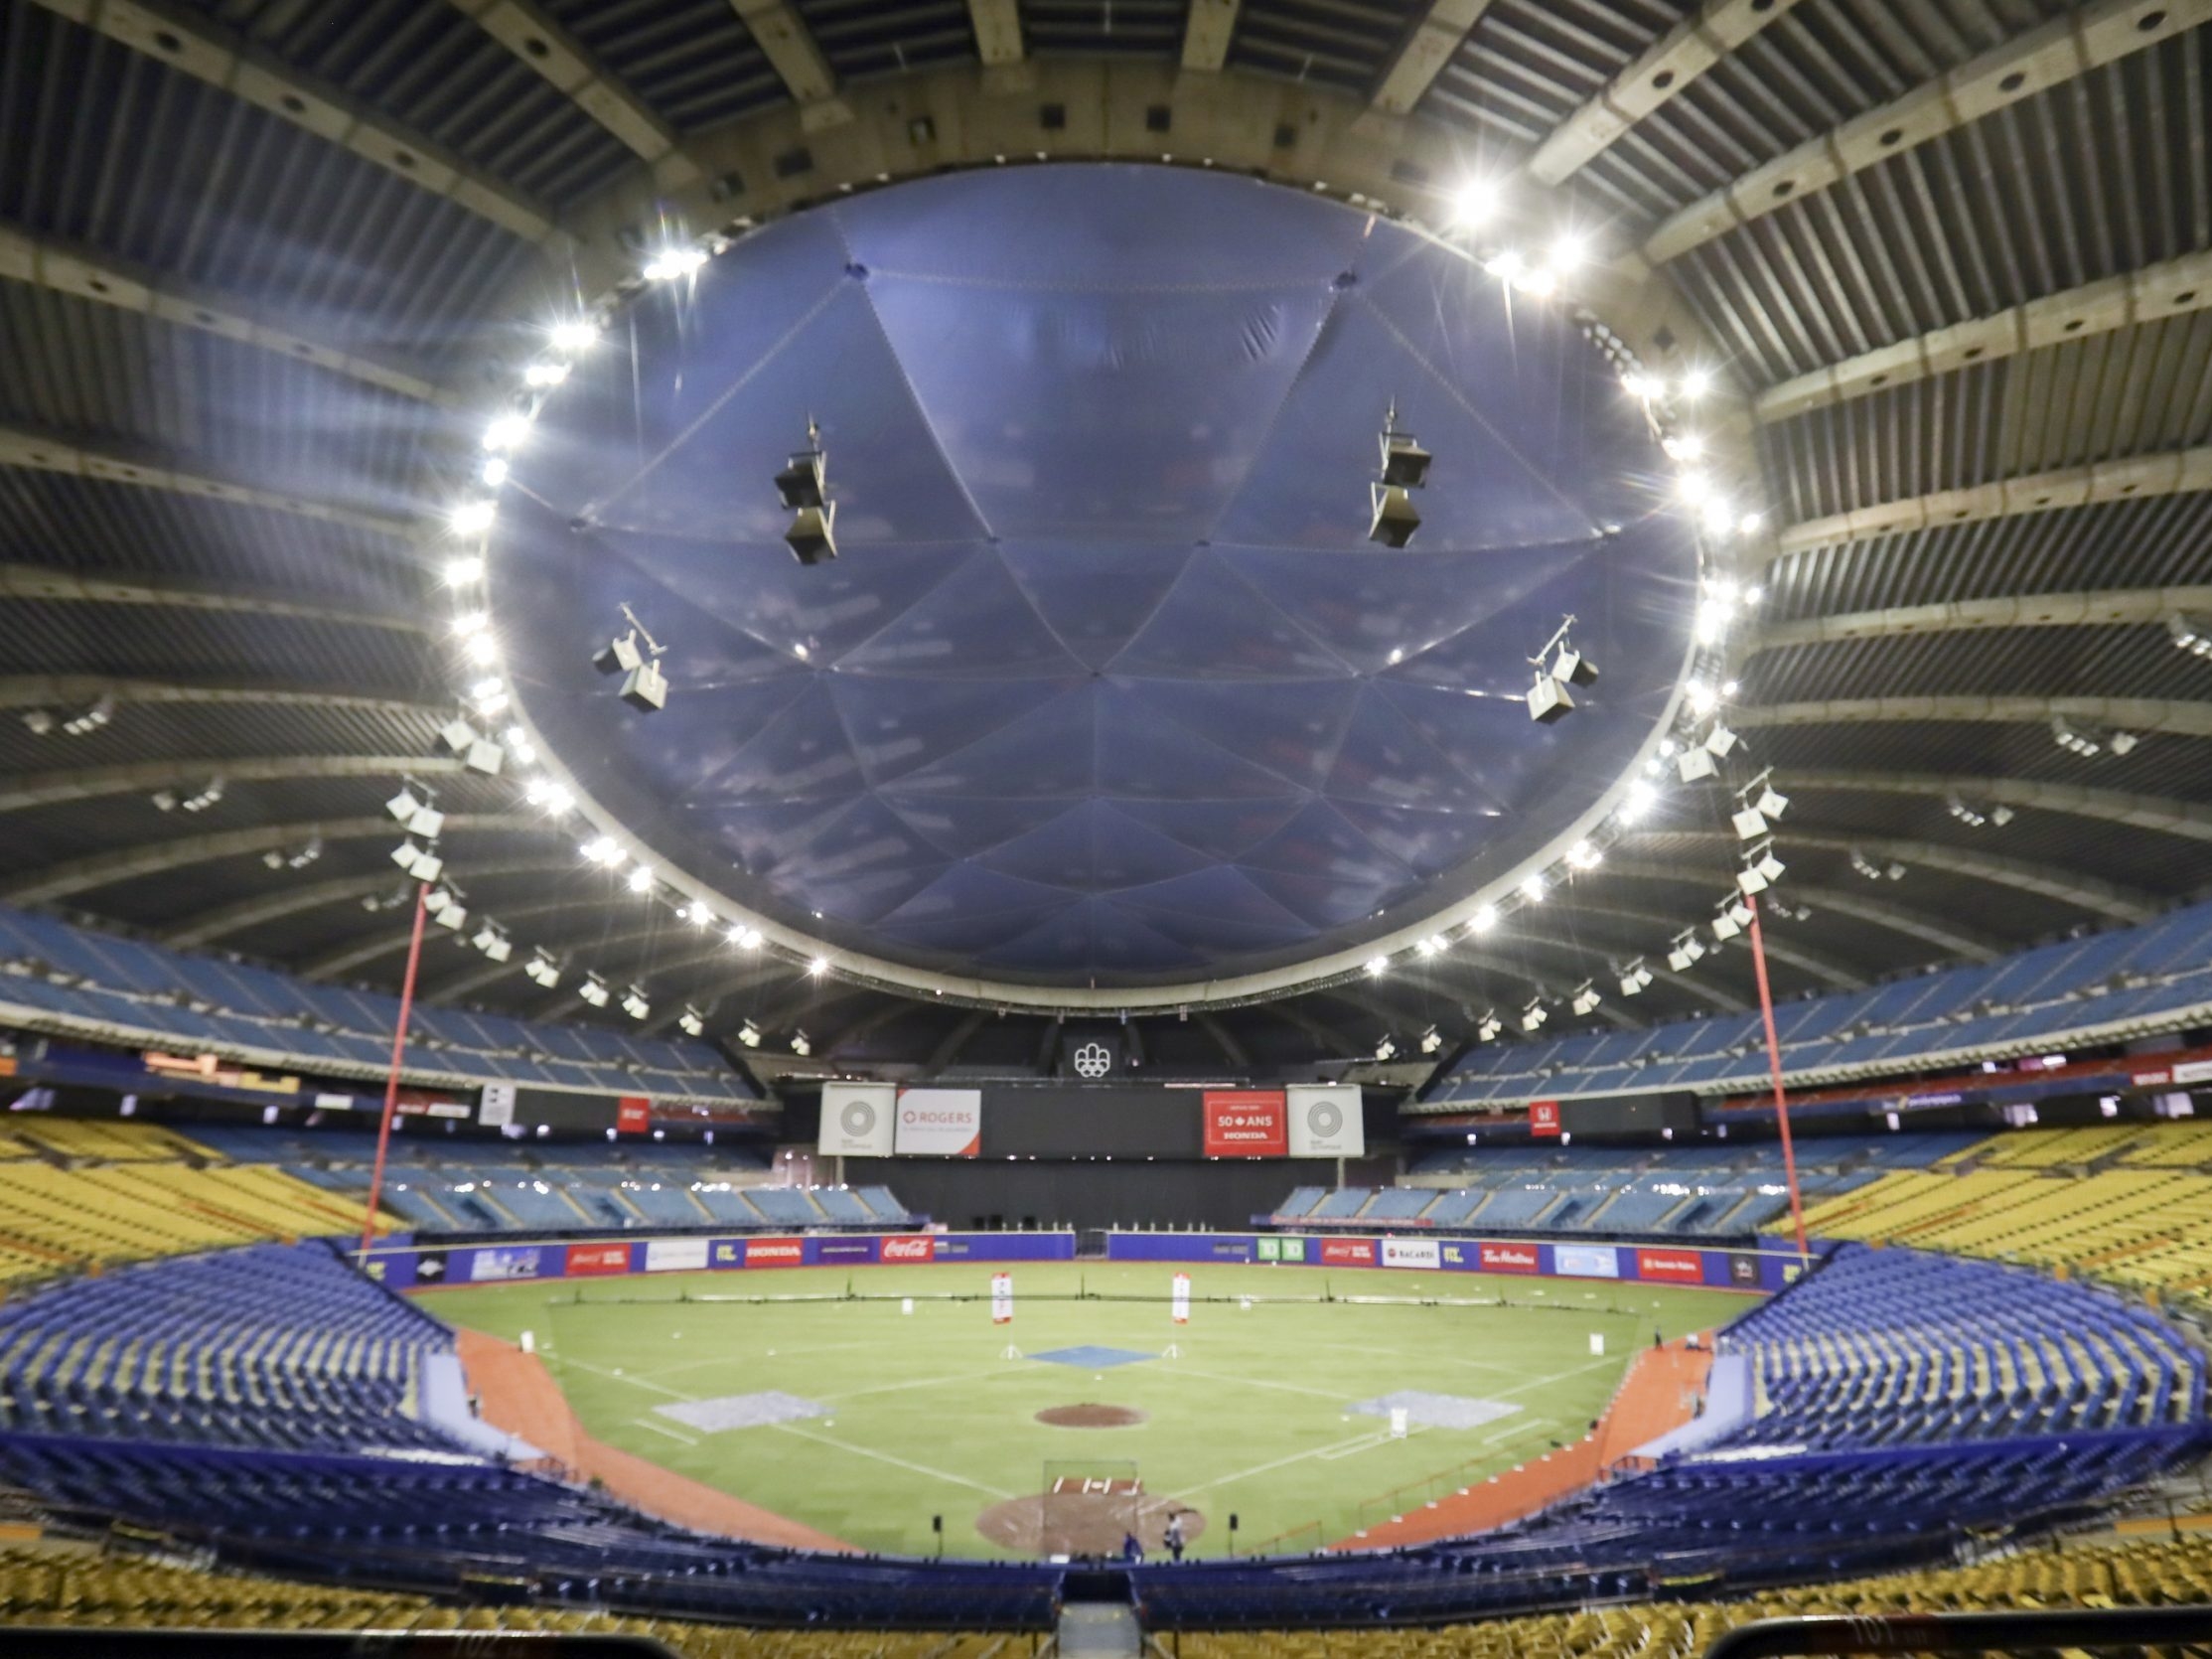 MLB players say Nashville is best spot for expansion, Montreal